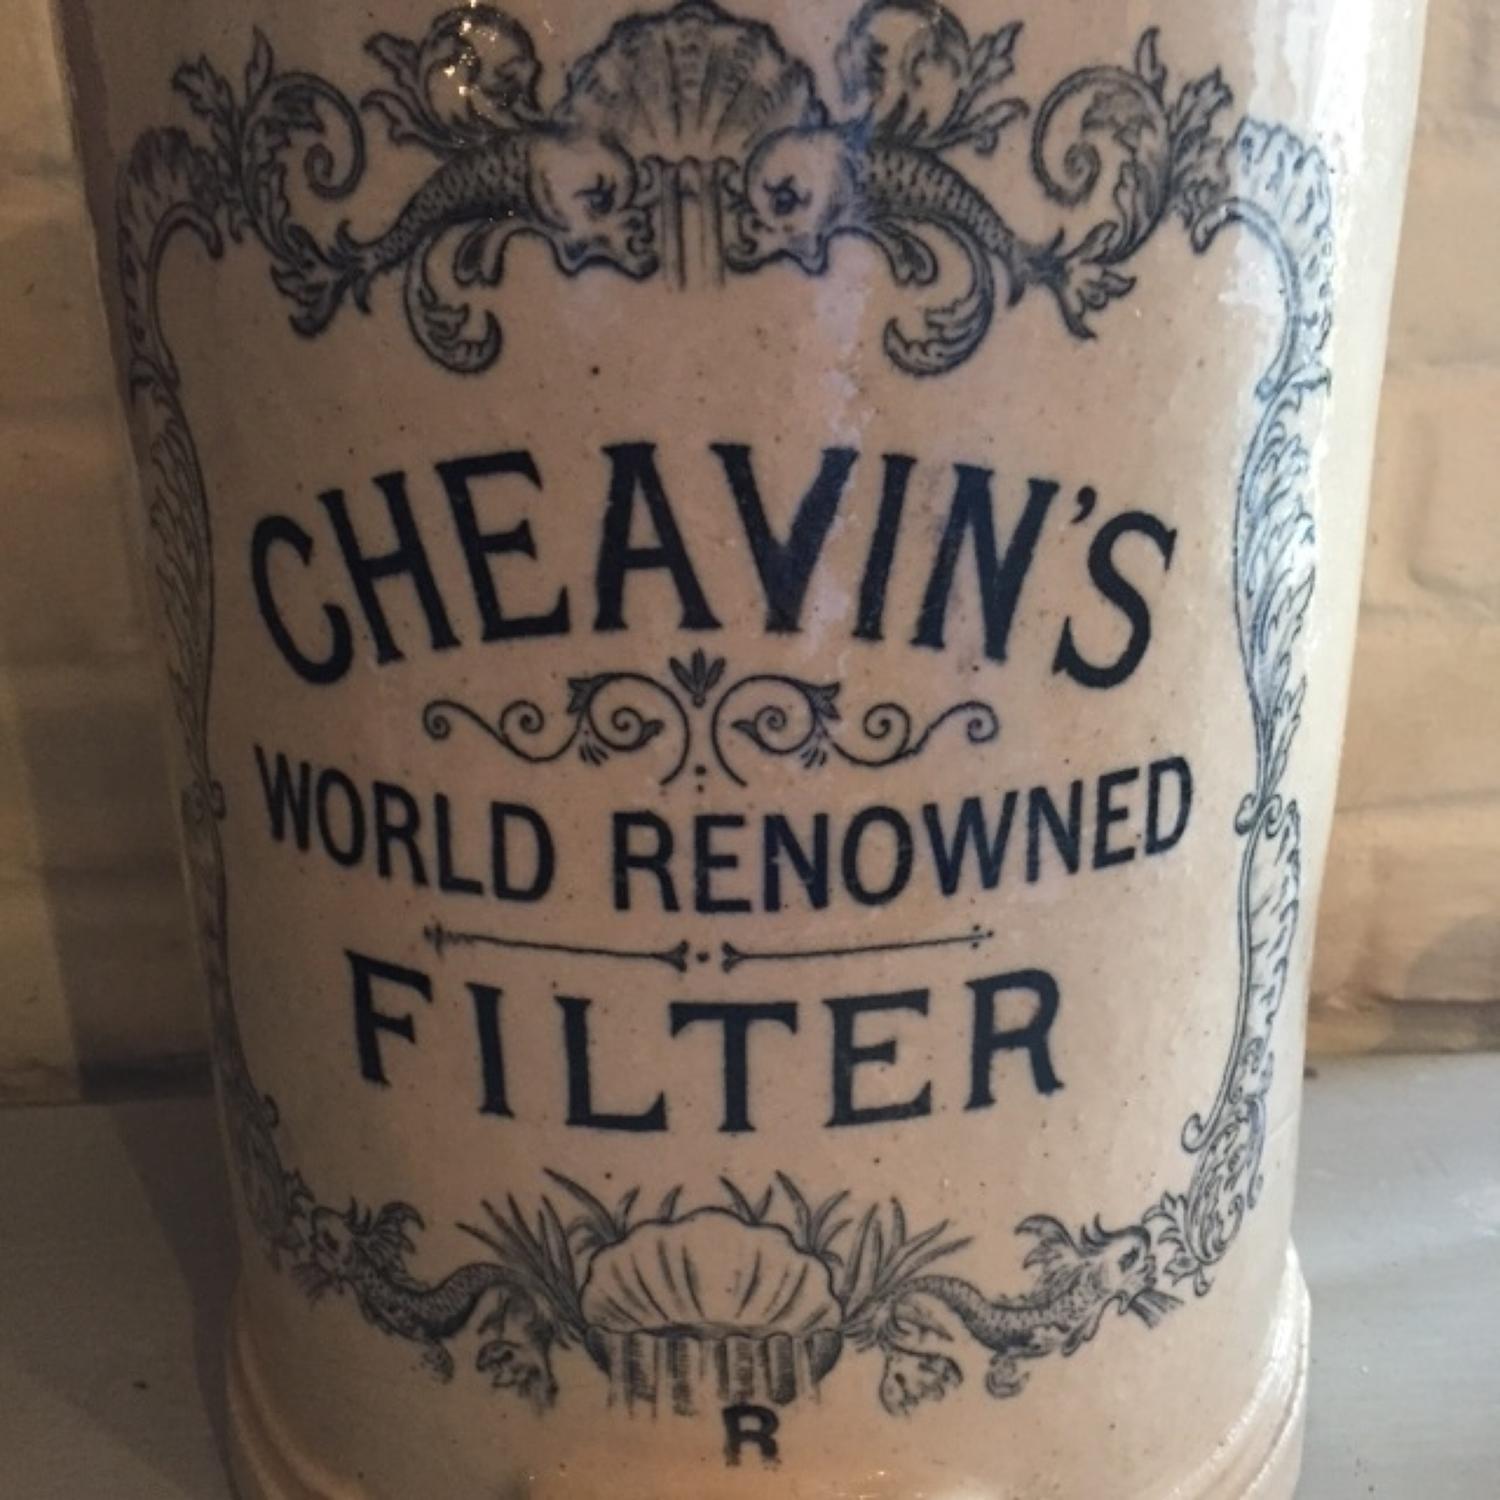 Cheavins Water Filter